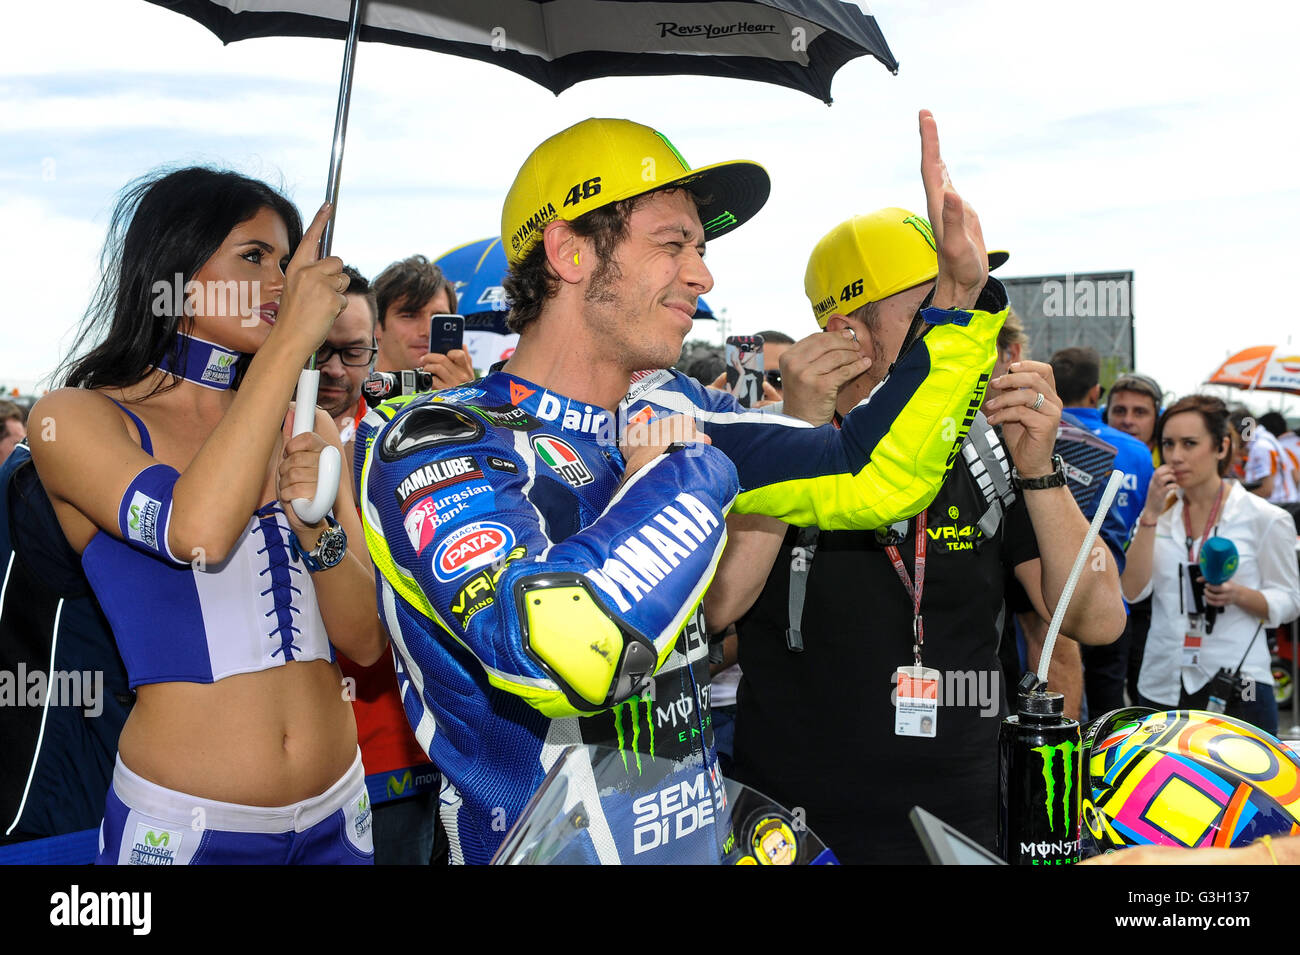 Le mans, France. 08th May, 2016. Valentino Rossi (Movistar Yamaha) during on MotoGP race day. Valentino Rossi is an Italian professional motorcycle racer and multiple MotoGP World Champion. He is one of the most successful motorcycle racers of all time, with nine Grand Prix World Championships © Gaetano Piazzolla/Pacific Press/Alamy Live News Stock Photo